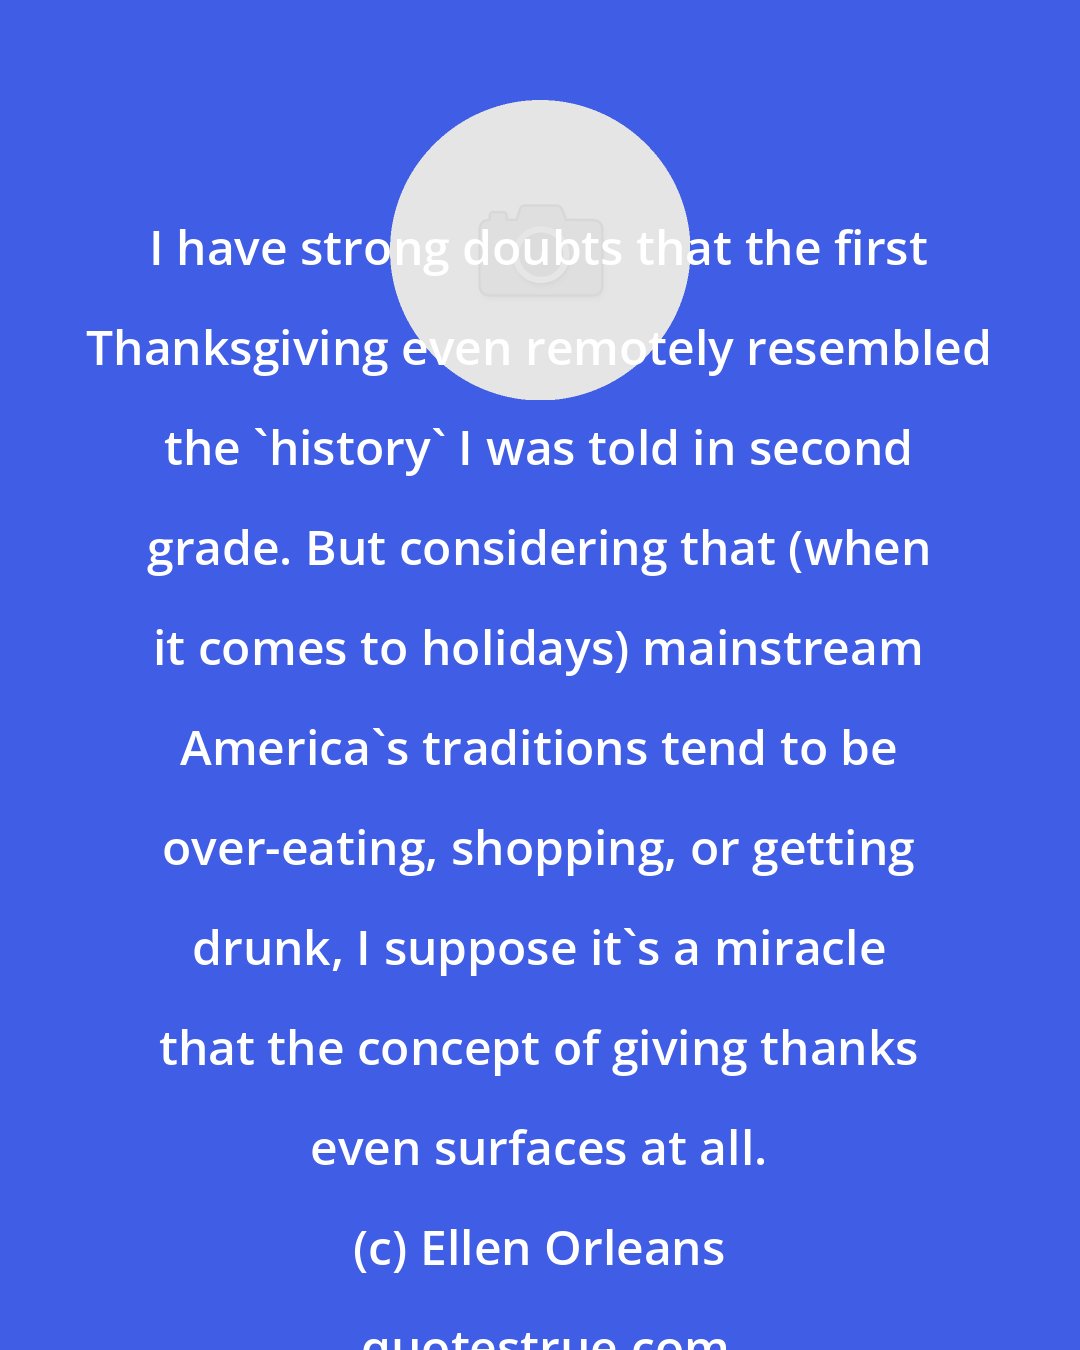 Ellen Orleans: I have strong doubts that the first Thanksgiving even remotely resembled the 'history' I was told in second grade. But considering that (when it comes to holidays) mainstream America's traditions tend to be over-eating, shopping, or getting drunk, I suppose it's a miracle that the concept of giving thanks even surfaces at all.